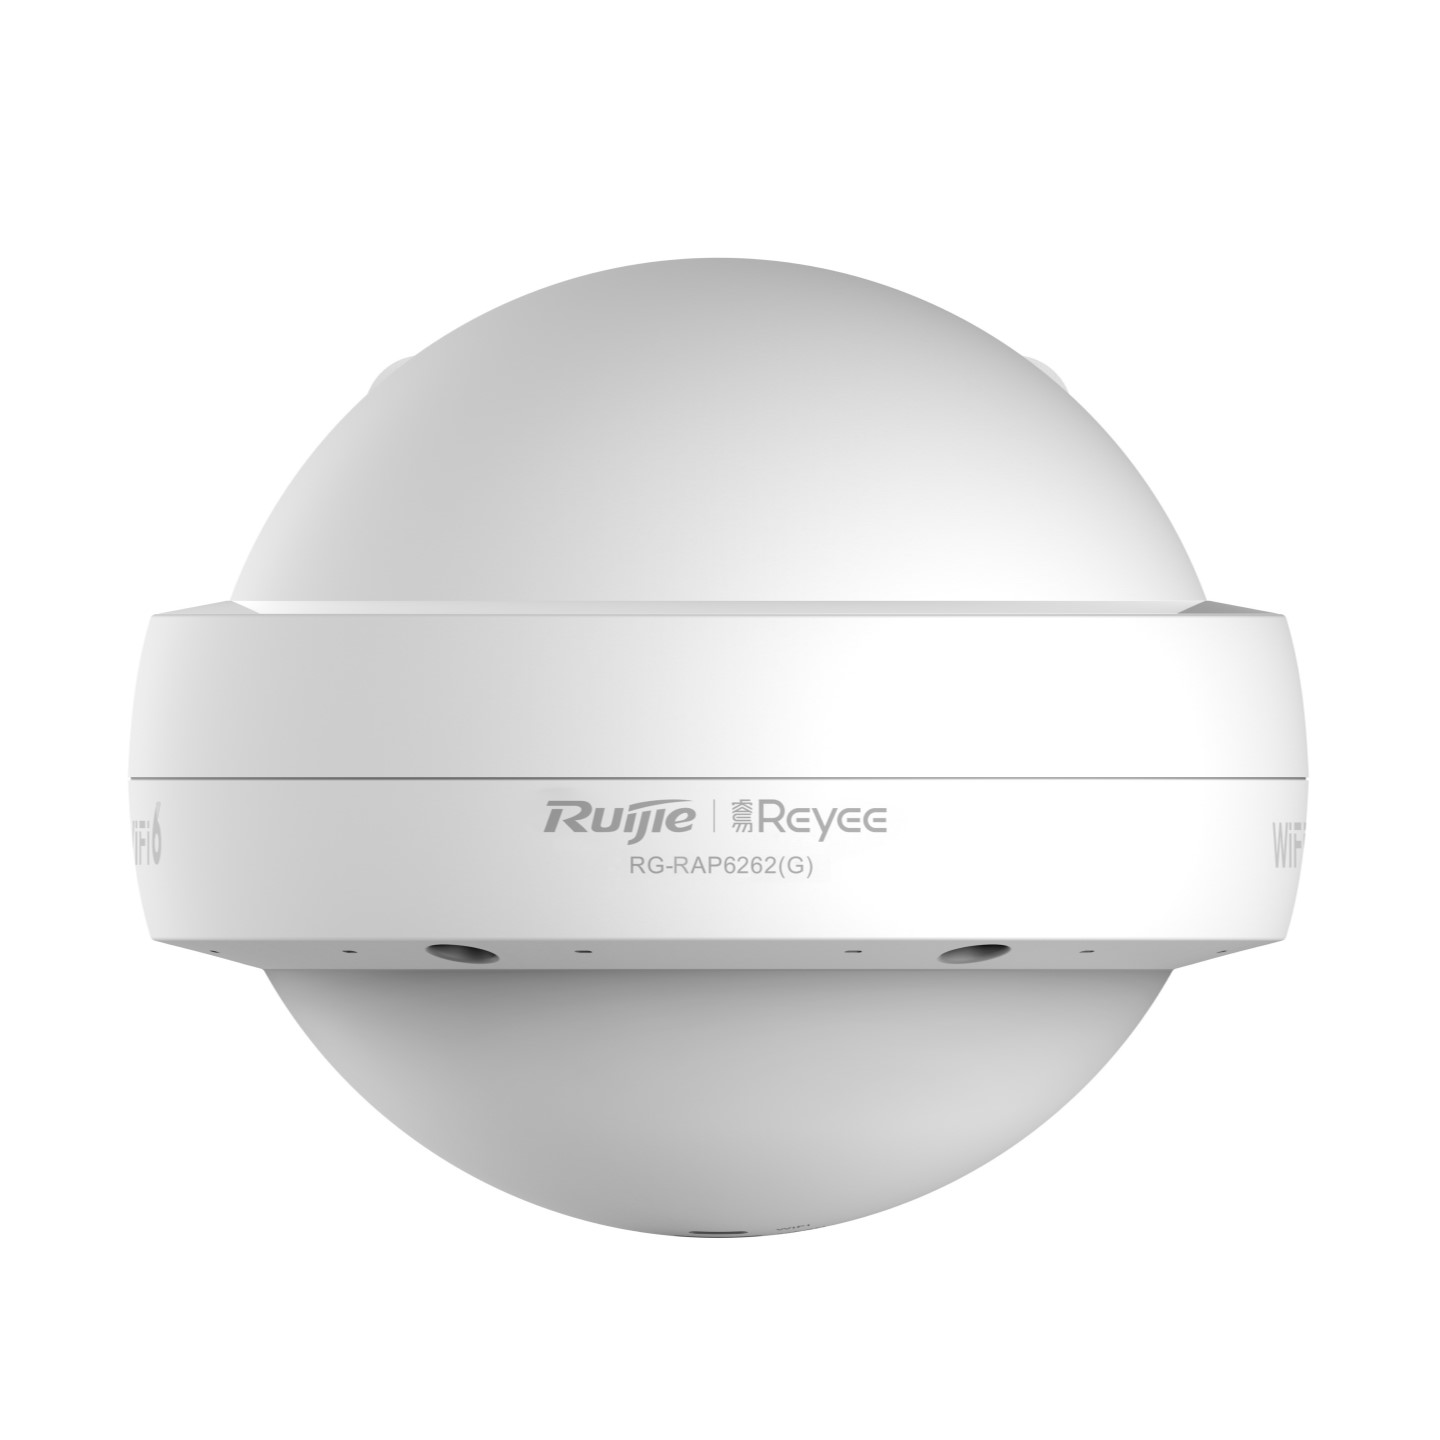 RG-RAP6262(G) Wi-Fi 6 AX1800 Outdoor Omni-directional Access Point ...